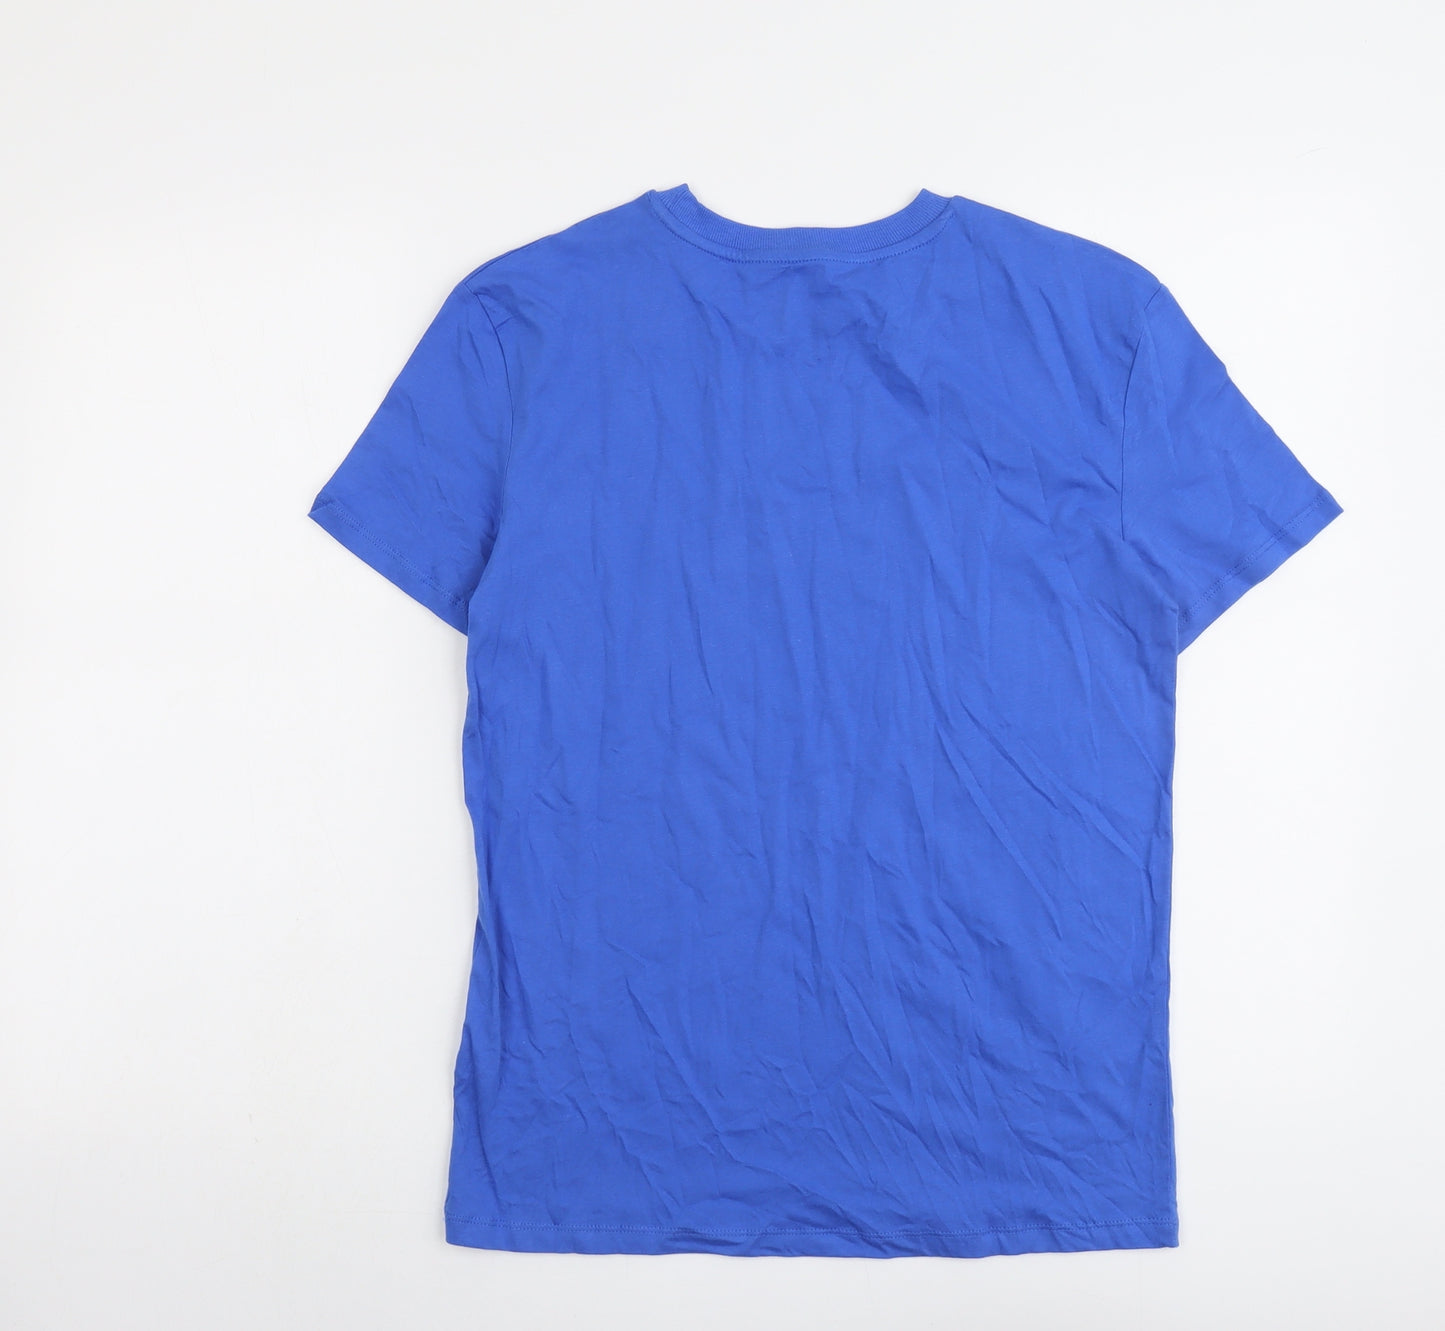 Marks and Spencer Boys Blue Cotton Basic T-Shirt Size 12-13 Years Round Neck Pullover - Brooklyn NYC